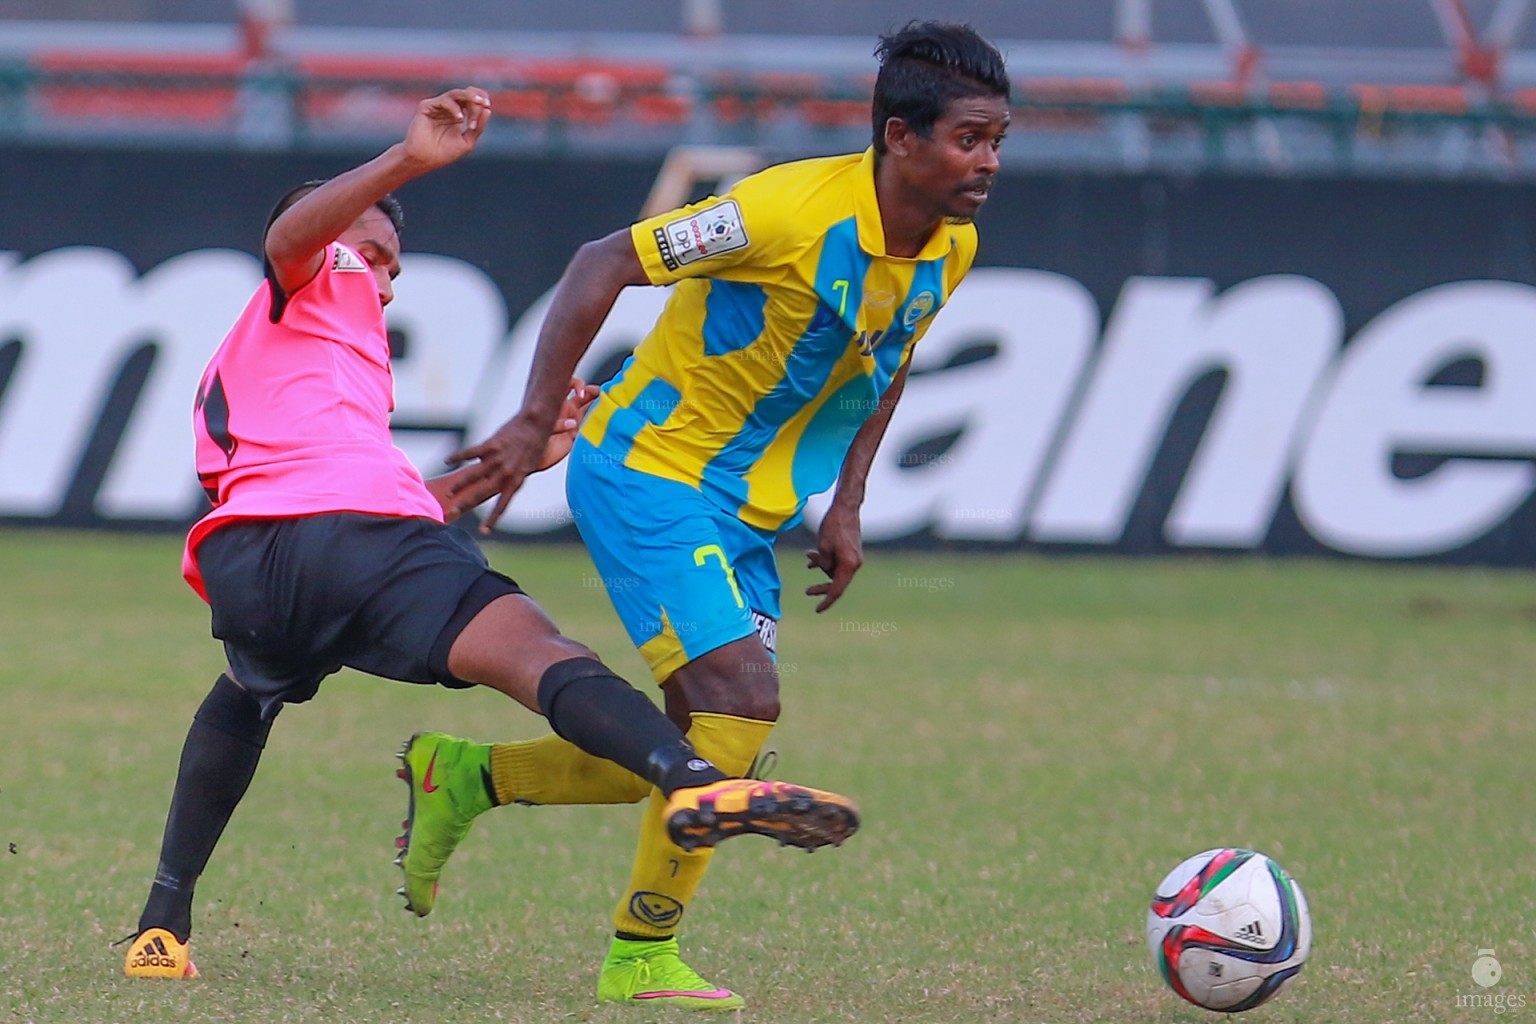 Club Valencia vs United Victory in the second round of Ooredoo Dhivehi Premiere League. 2016 Male', Thursday 4 August 2016. (Images.mv Photo: Abdulla Abeedh)